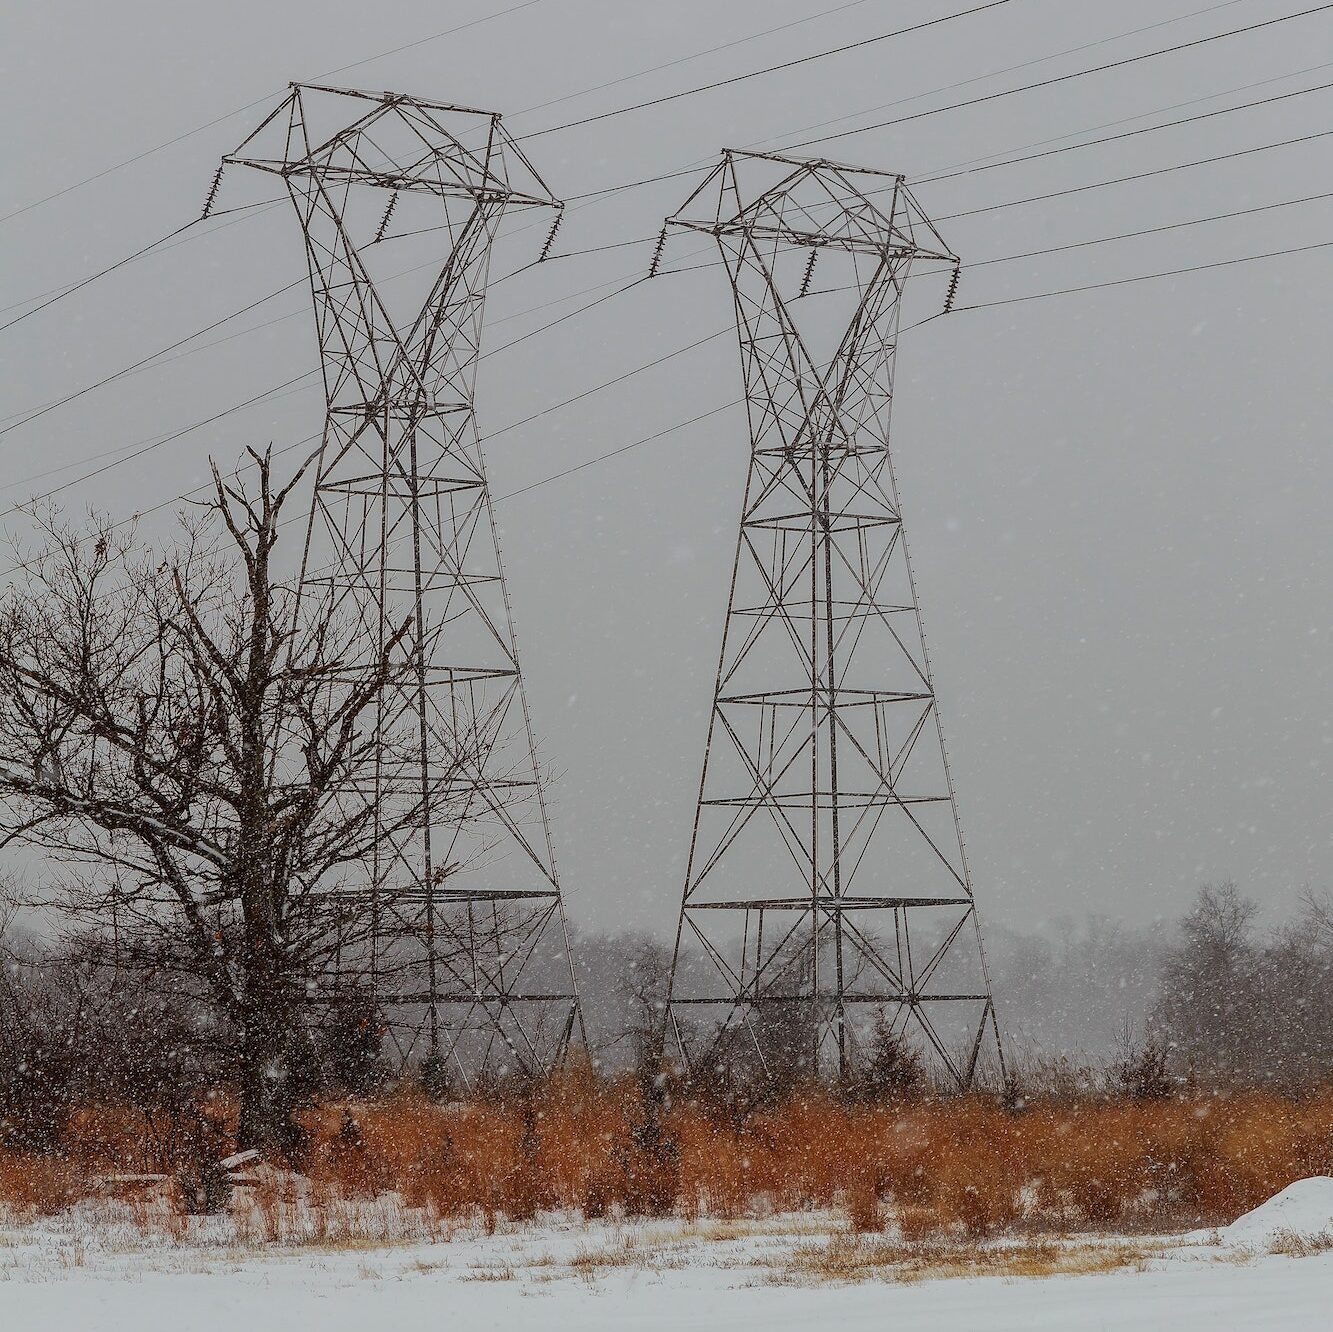 Power lines in winter scenery, electrical tower in wintertime with snow covered fields